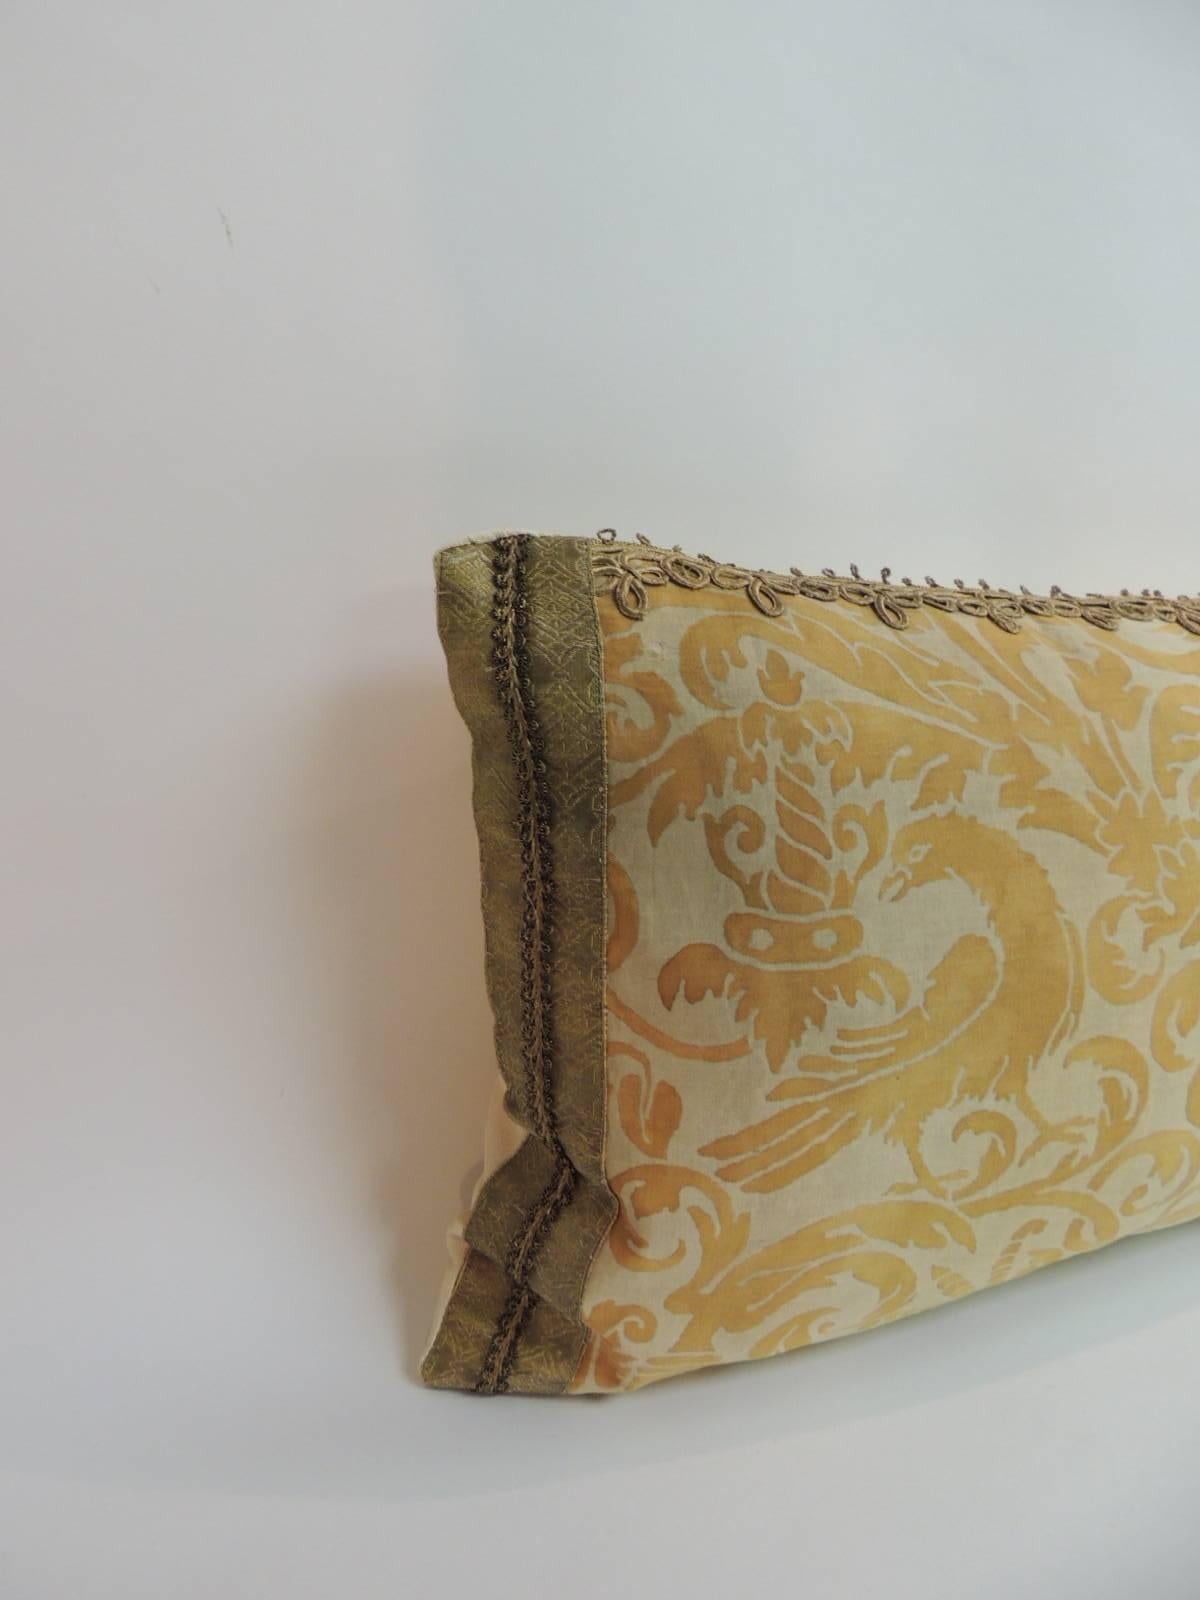 Antique Textiles Galleries:
Fortuny bolster pillow in the Uccelli pattern vintage textile in yellow on white. Embellished with an antique decorative metallic gold threads trim. Decorative pillow finished with a soft yellow backing. Throw vintage